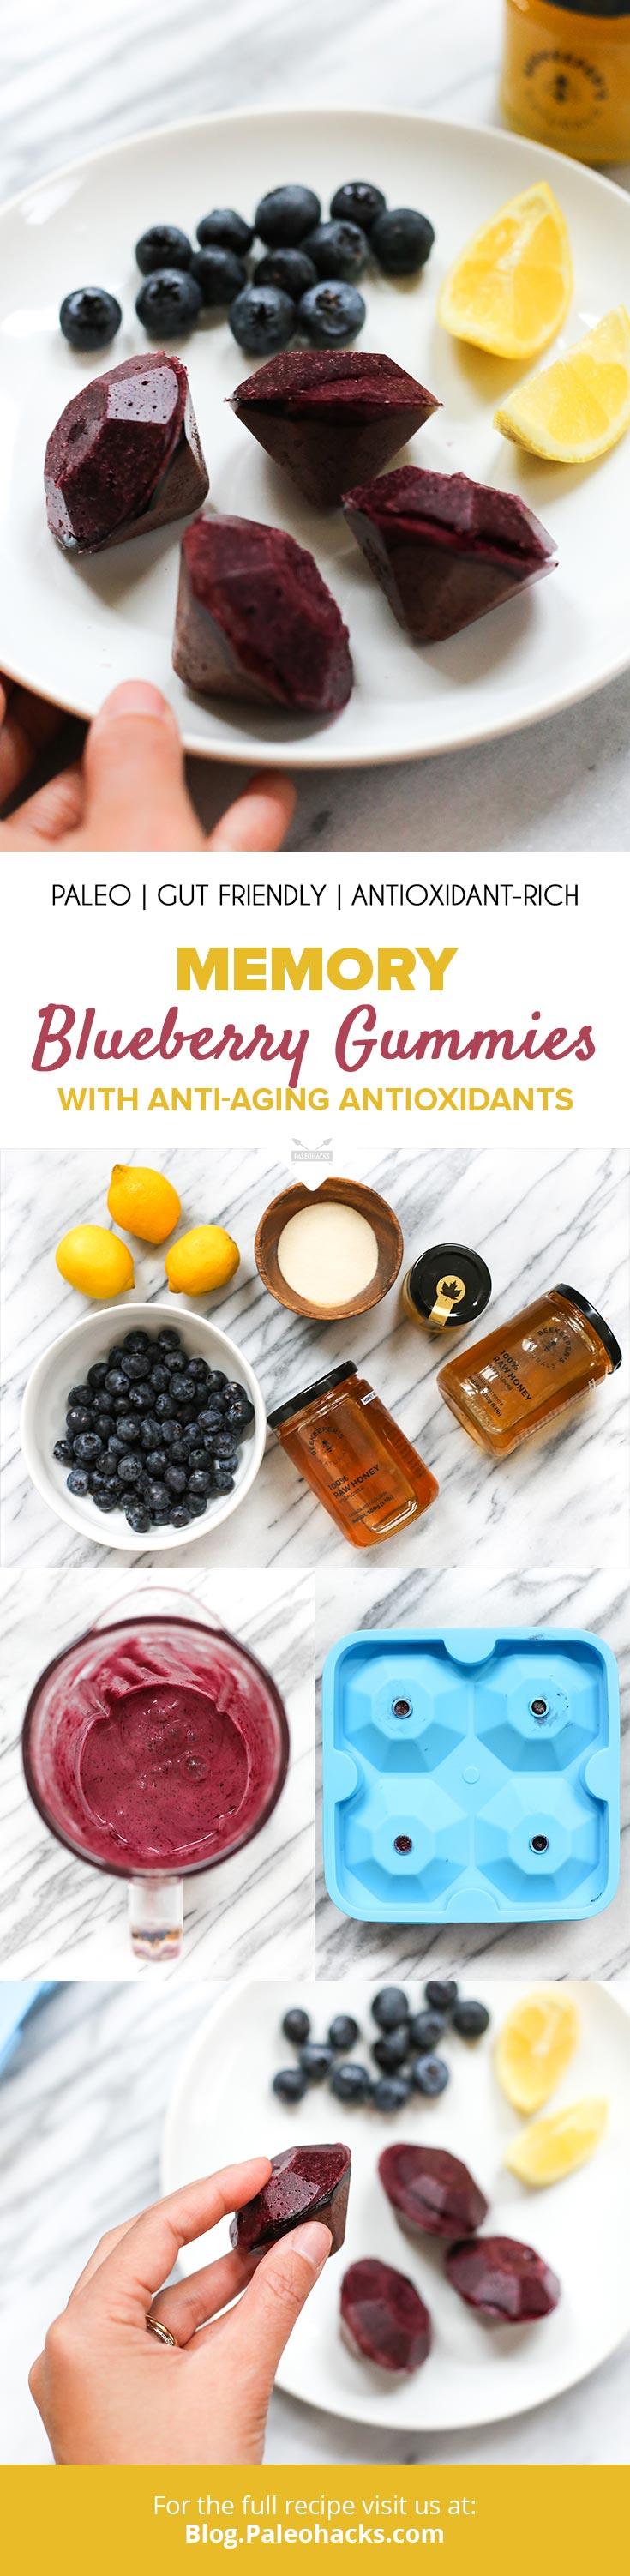 Give your brain a boost with these all-natural Memory Blueberry Gummies made with antioxidant-rich raw honey.